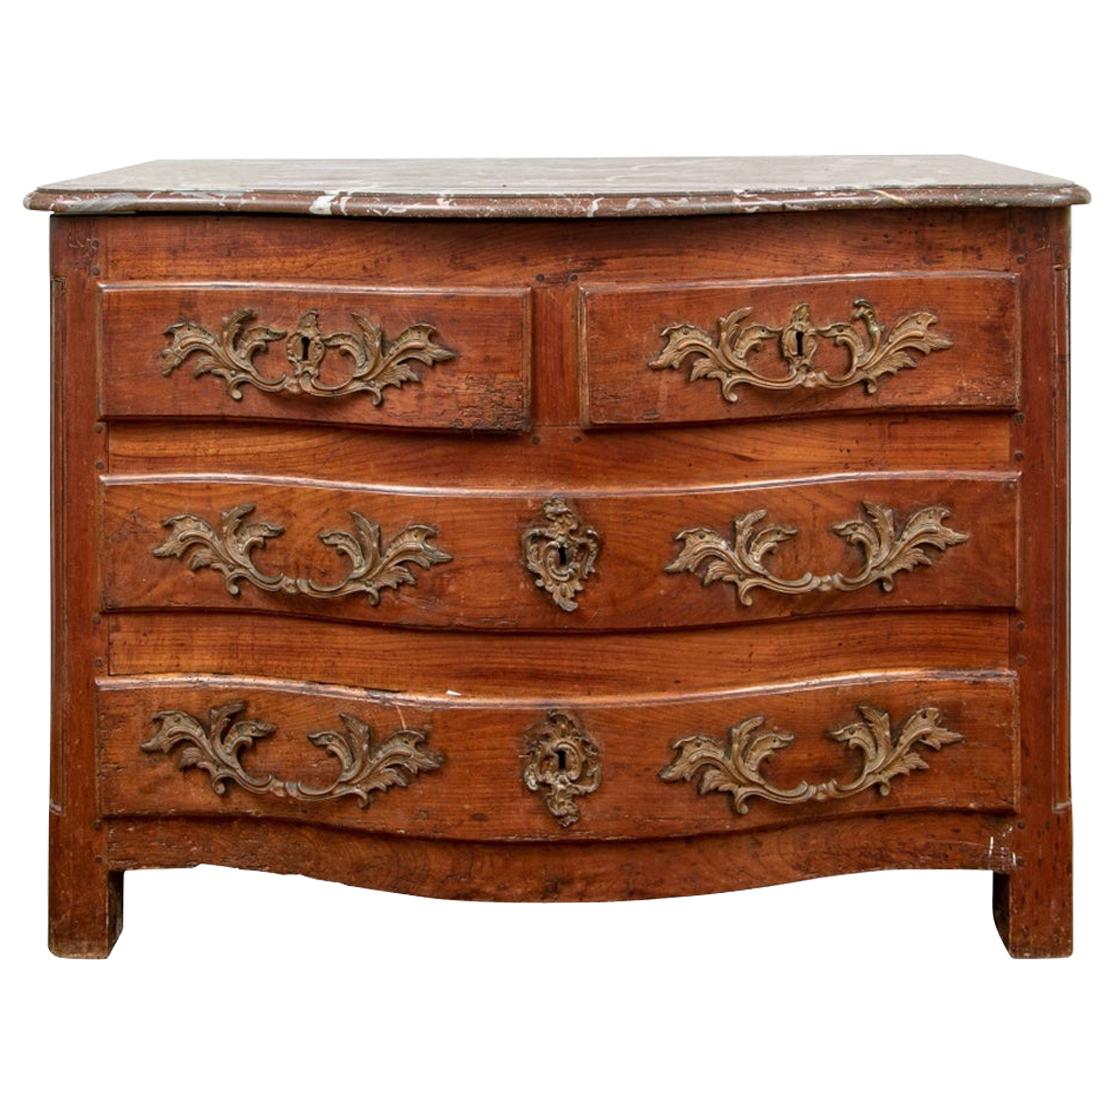 Antique French Marble-Top Commode